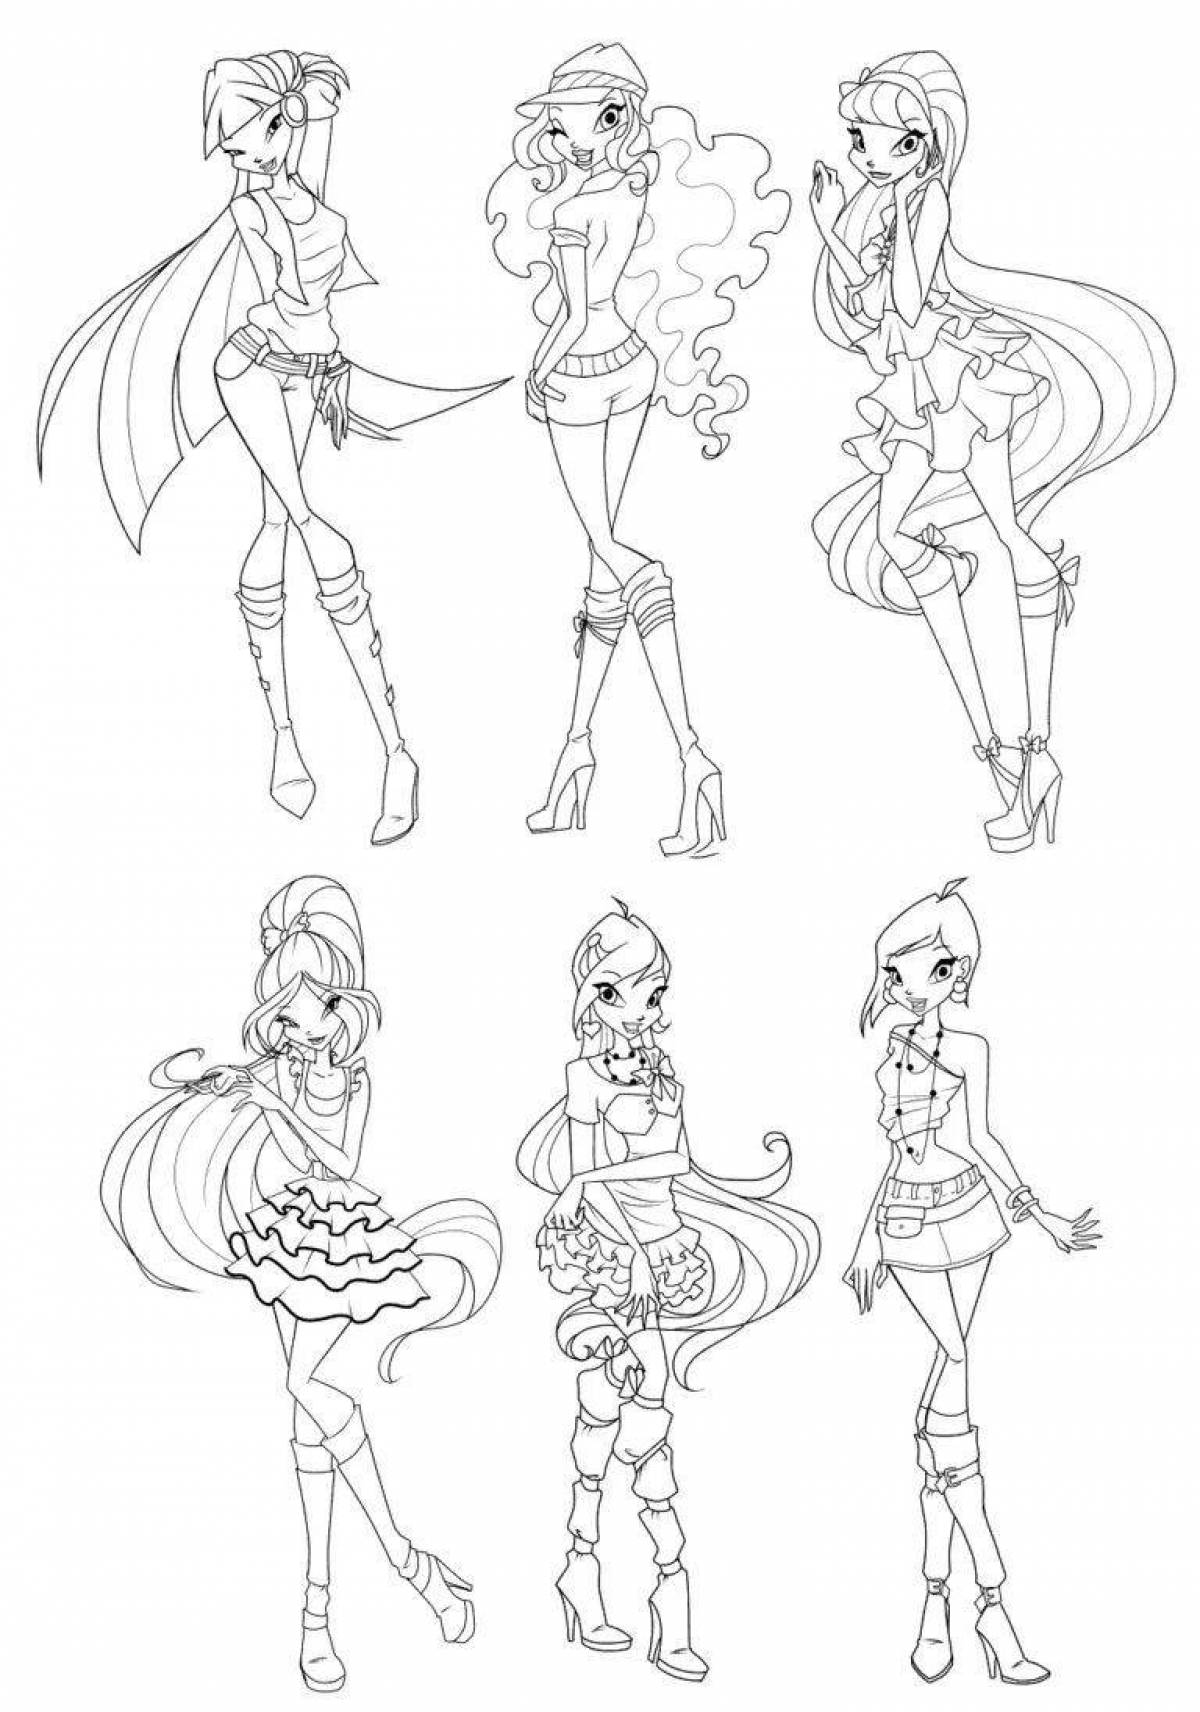 Charming winx coloring all together